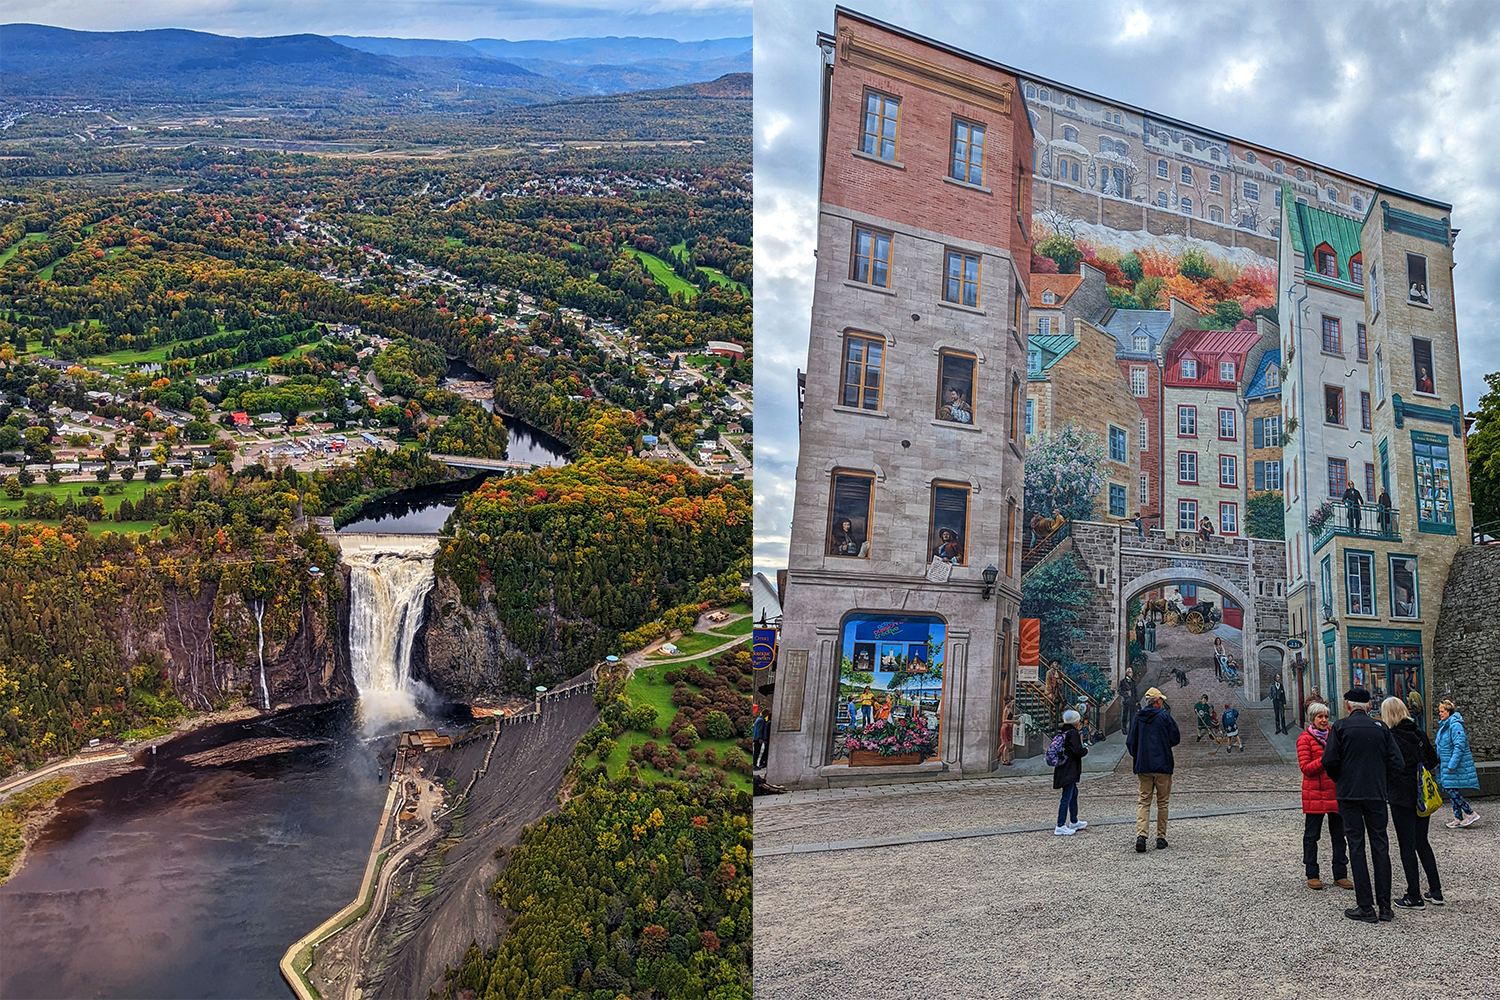 On the left, a photo of a waterfall in Quebec as taken from a helicopter. On the right, the Mural of Quebecers.